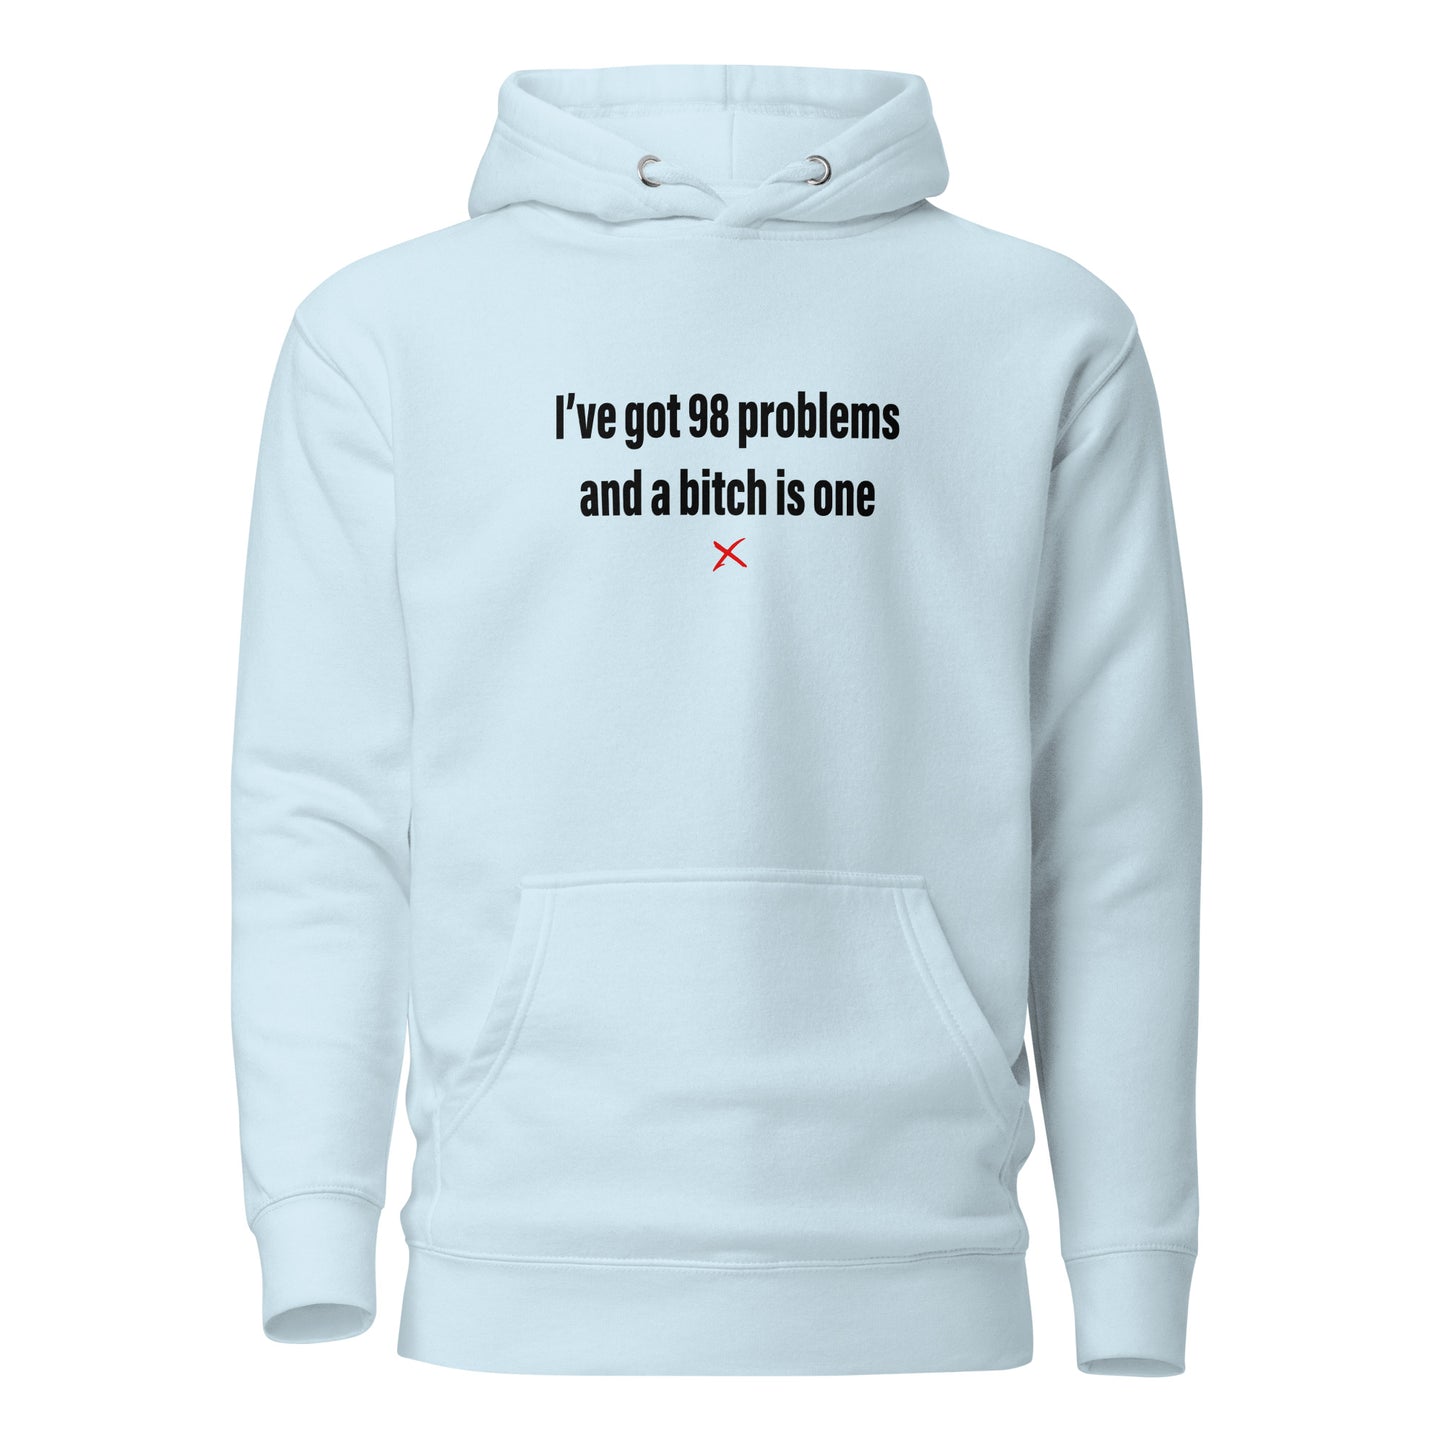 I've got 98 problems and a bitch is one - Hoodie